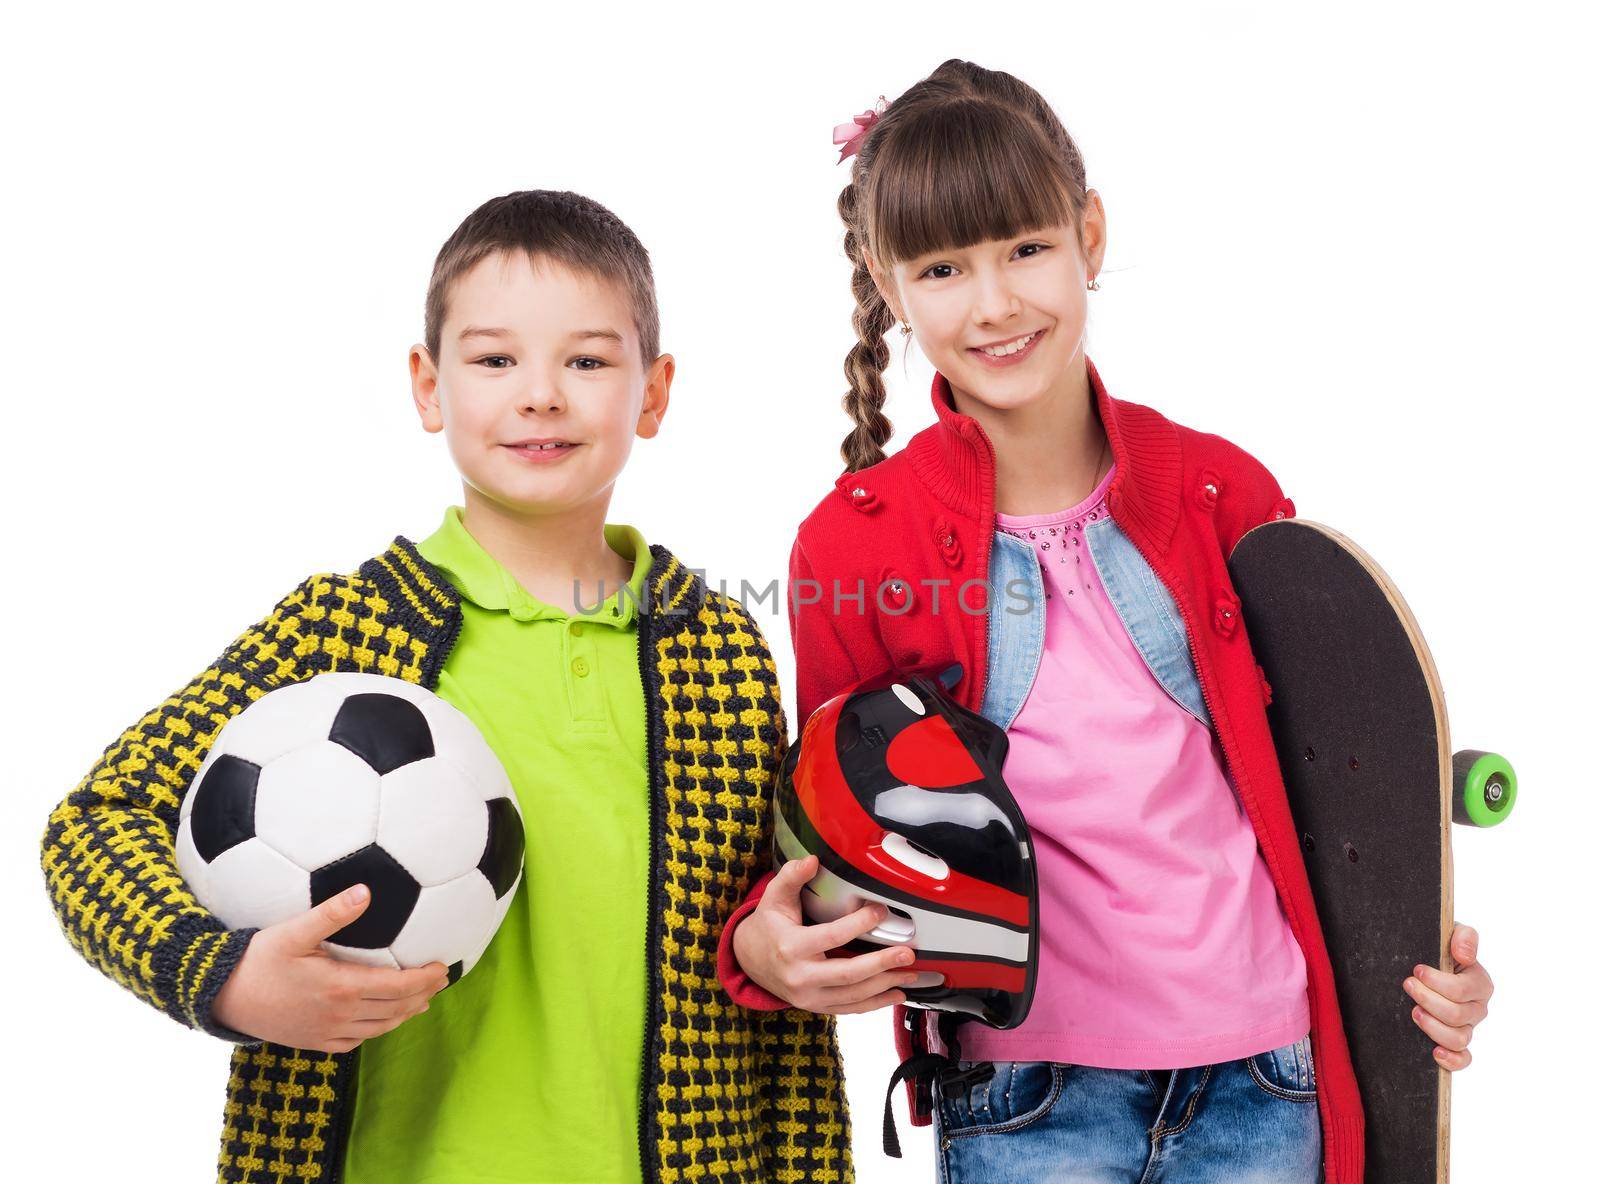 playful schoolchildren with sport skate and ball in hands isolated on white background